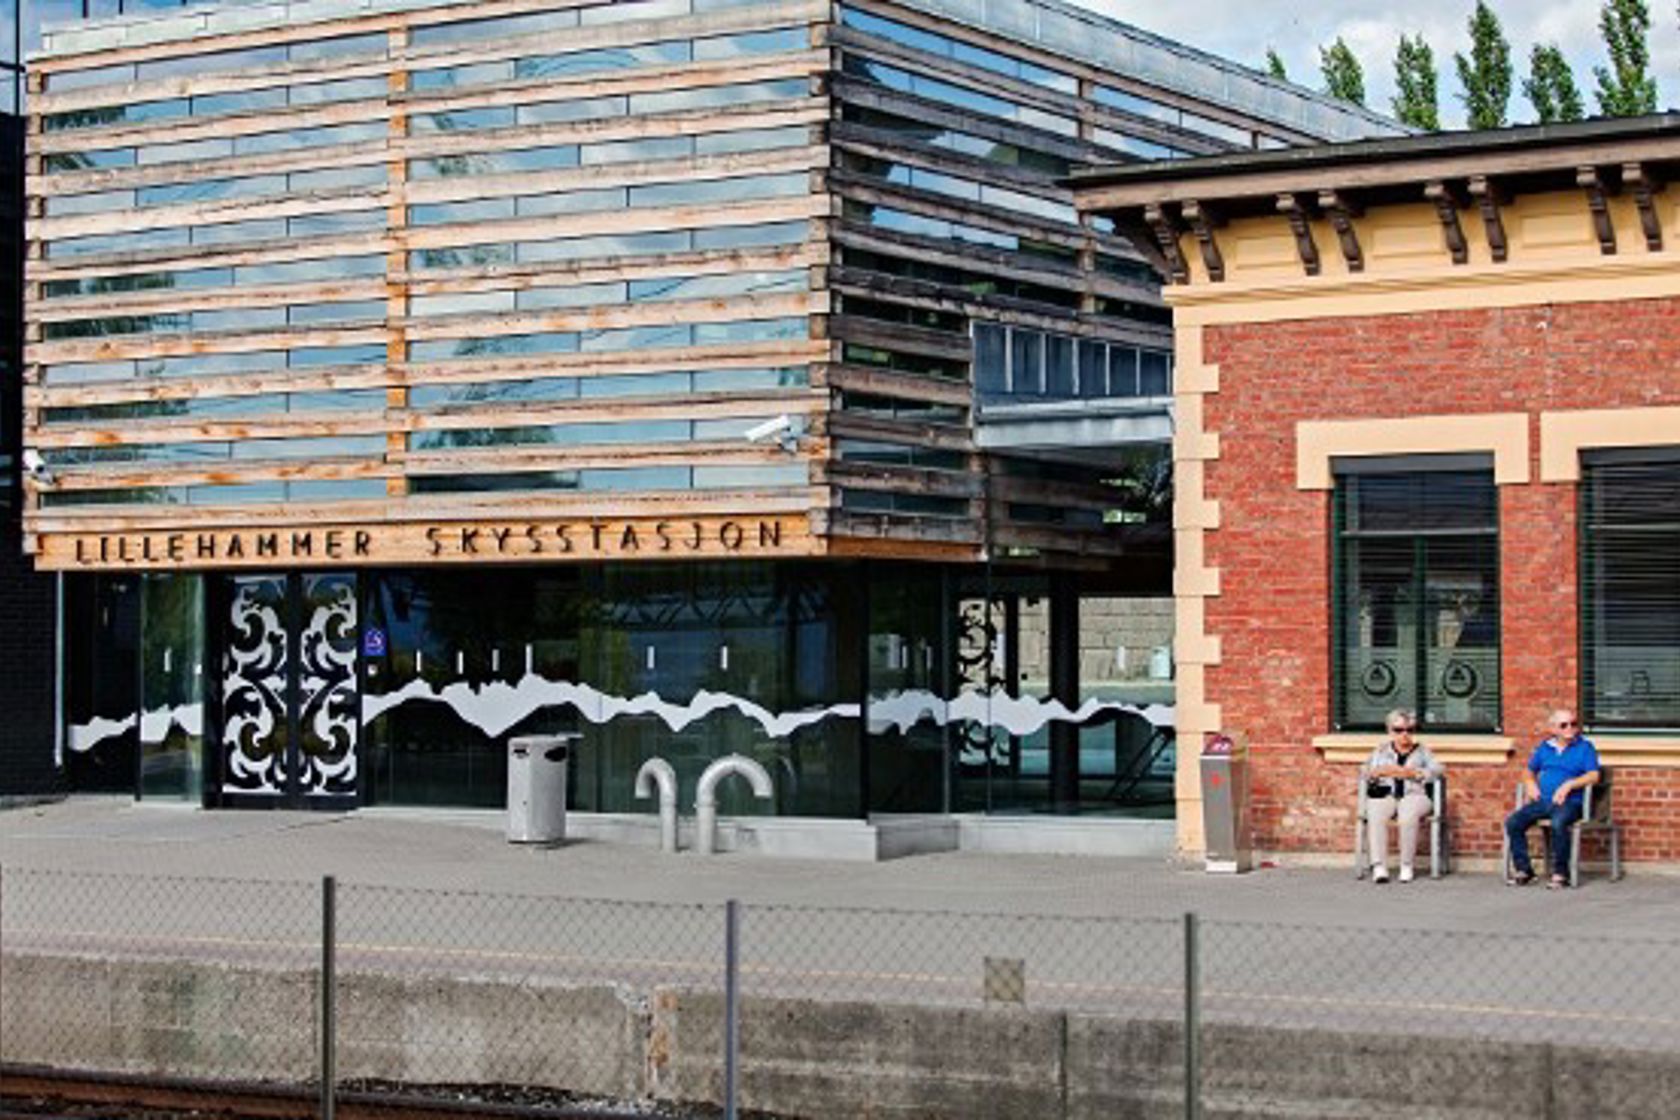 Exterior view of Lillehammer station